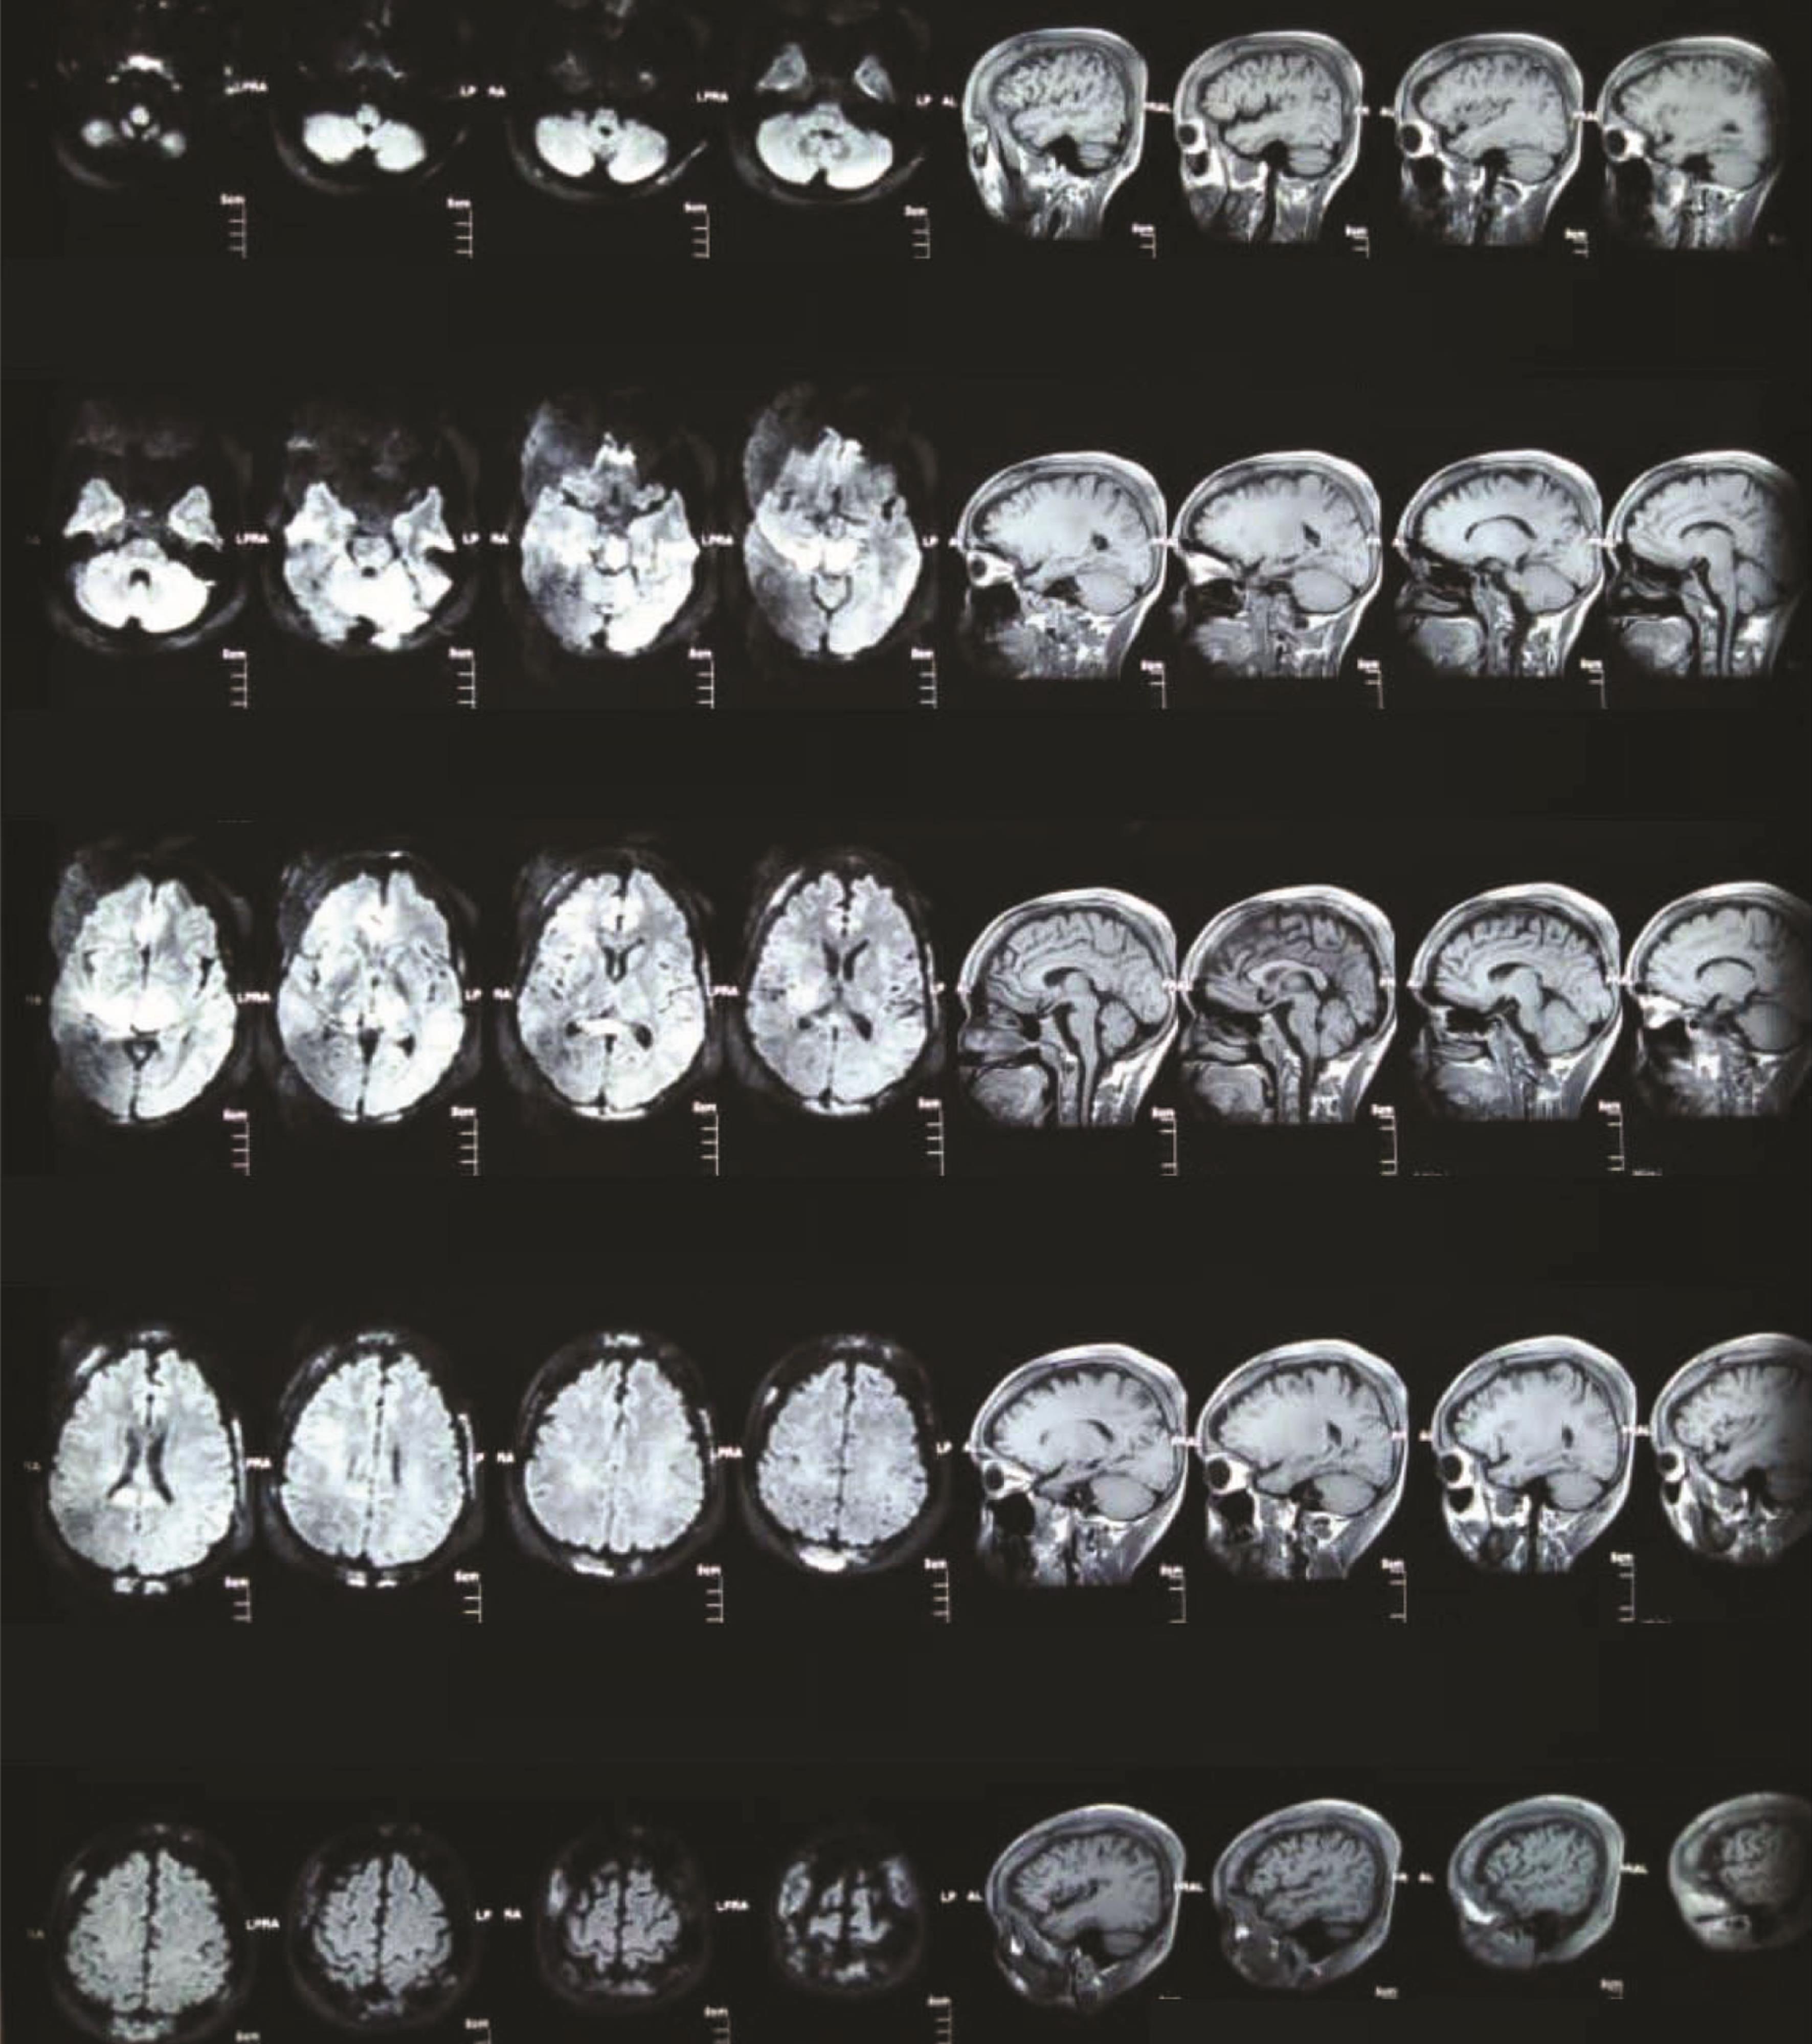 Brain magnetic resonance imaging scans of the patient, indicating left maxillary polypoid sinusitis and diploic space marrow signal changes consistent with known disease.